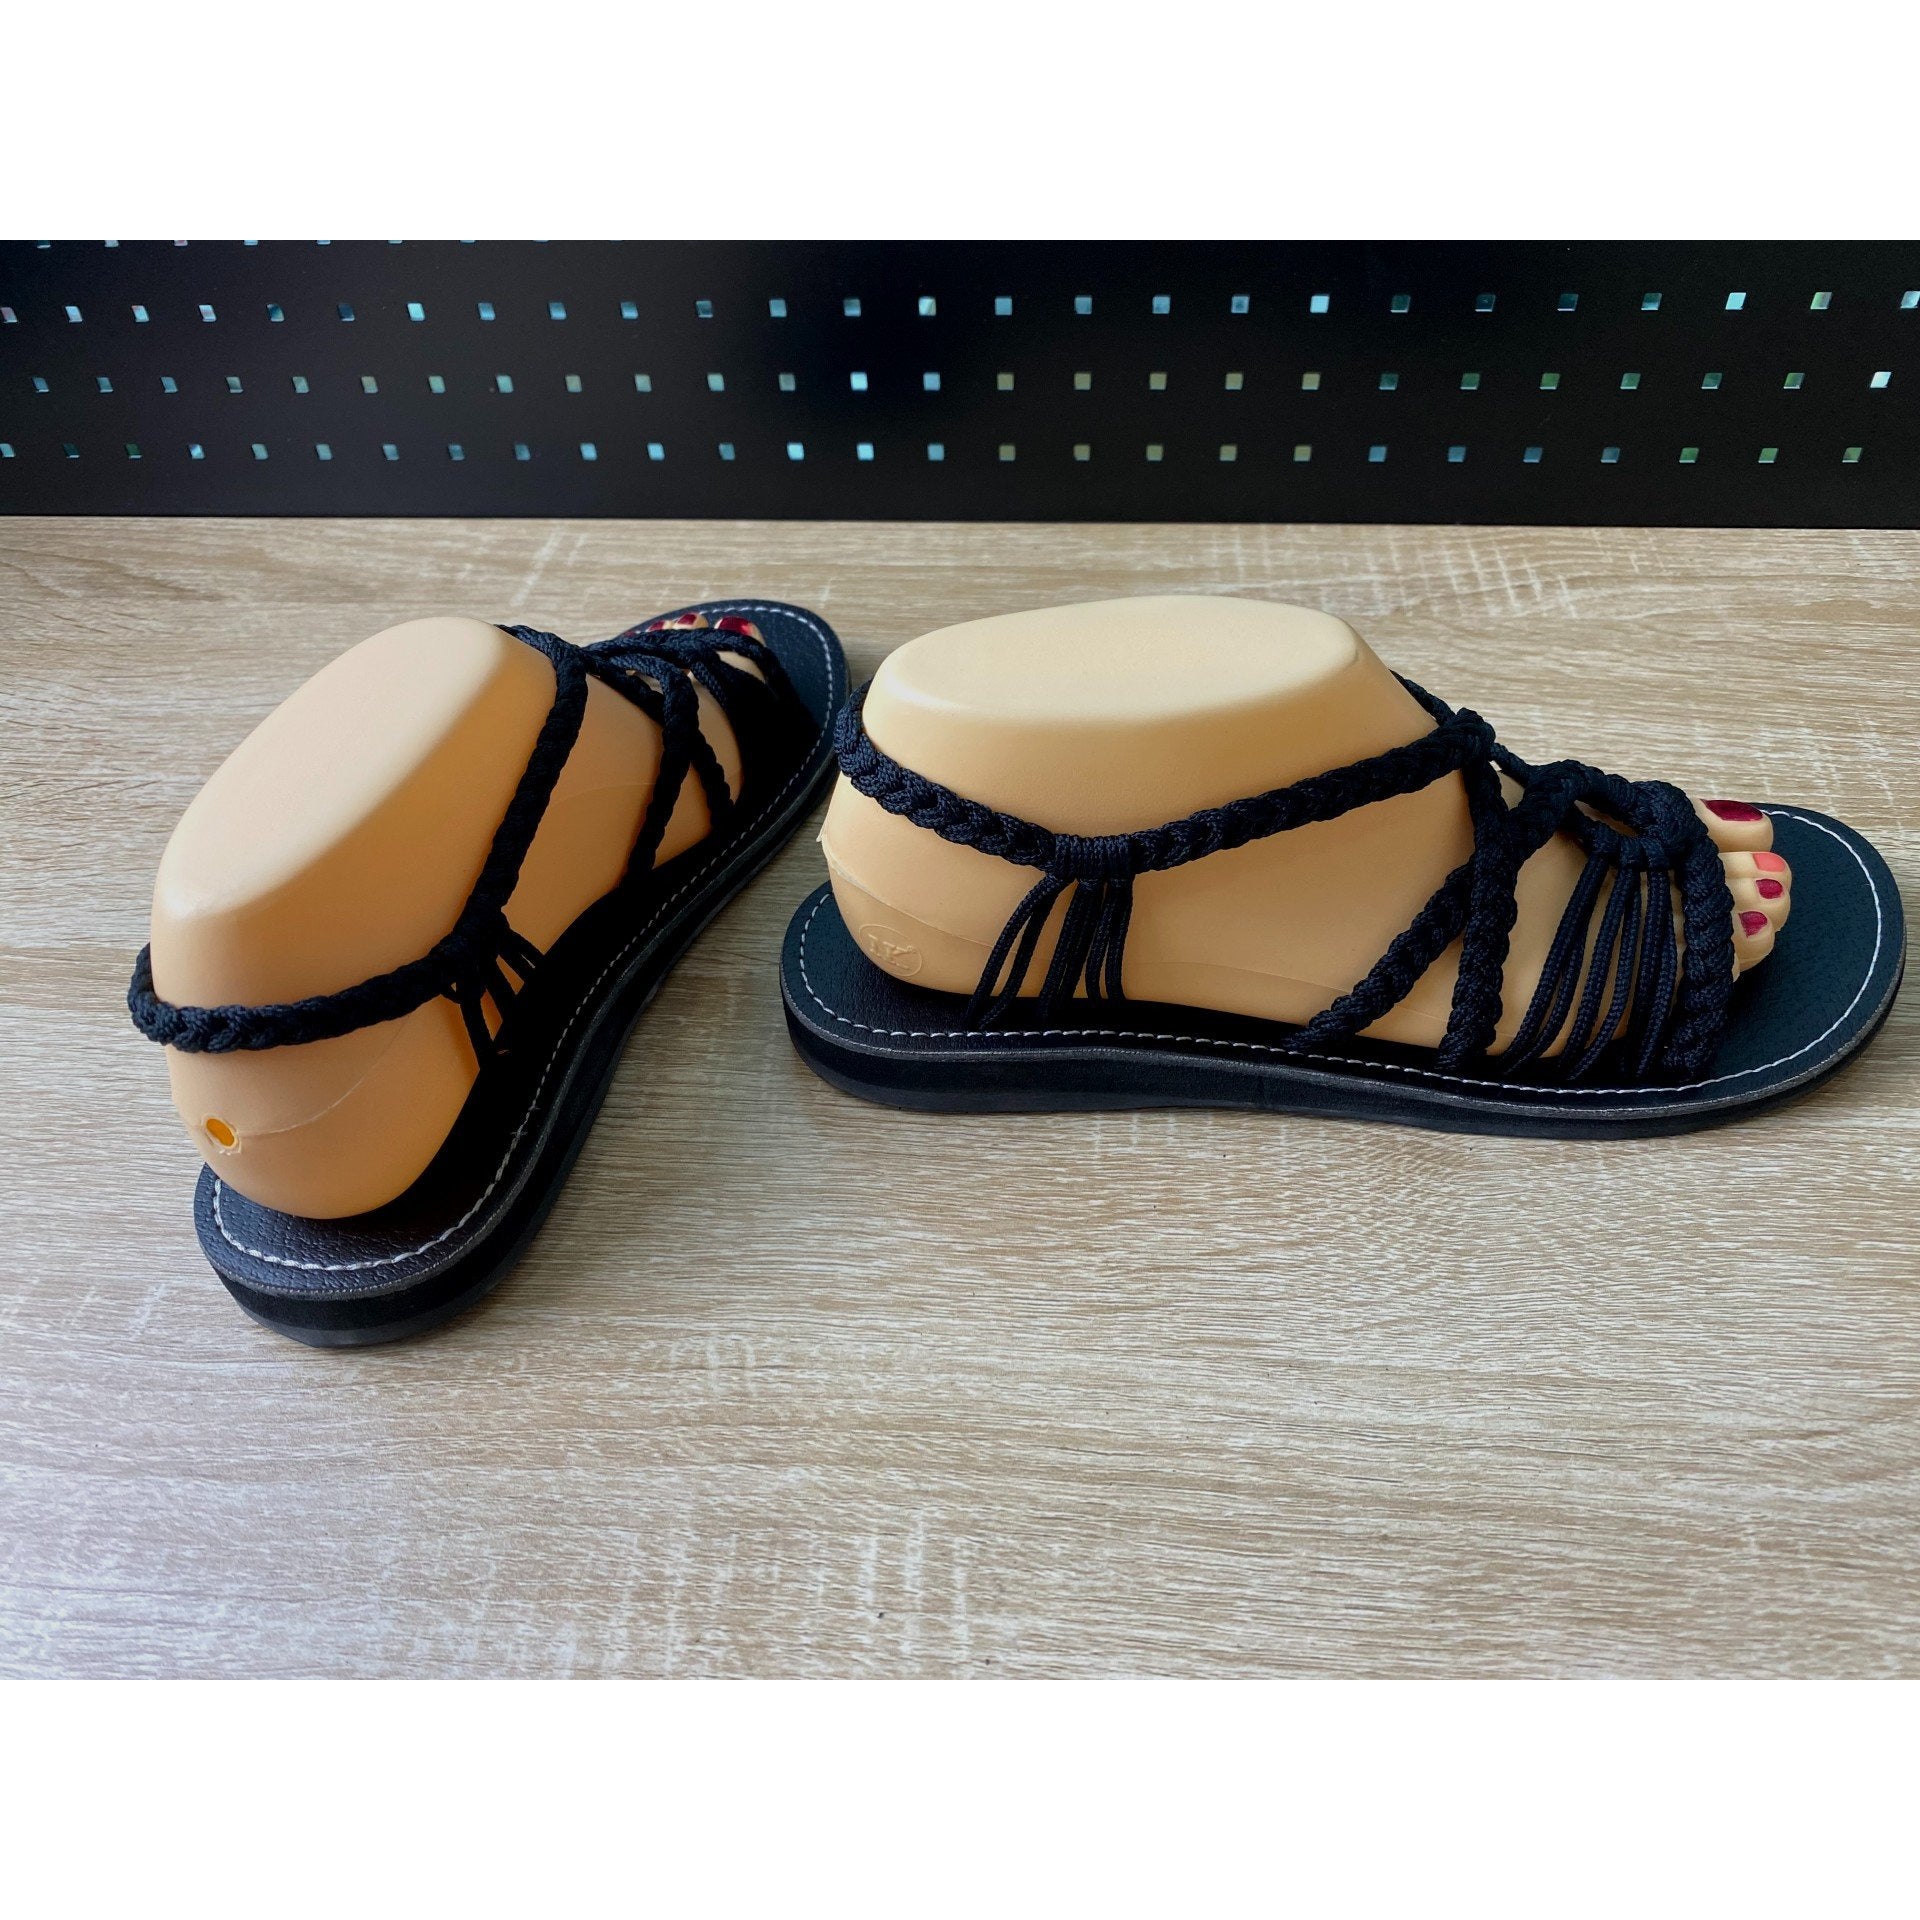 Shoes - Braided Sandals BL